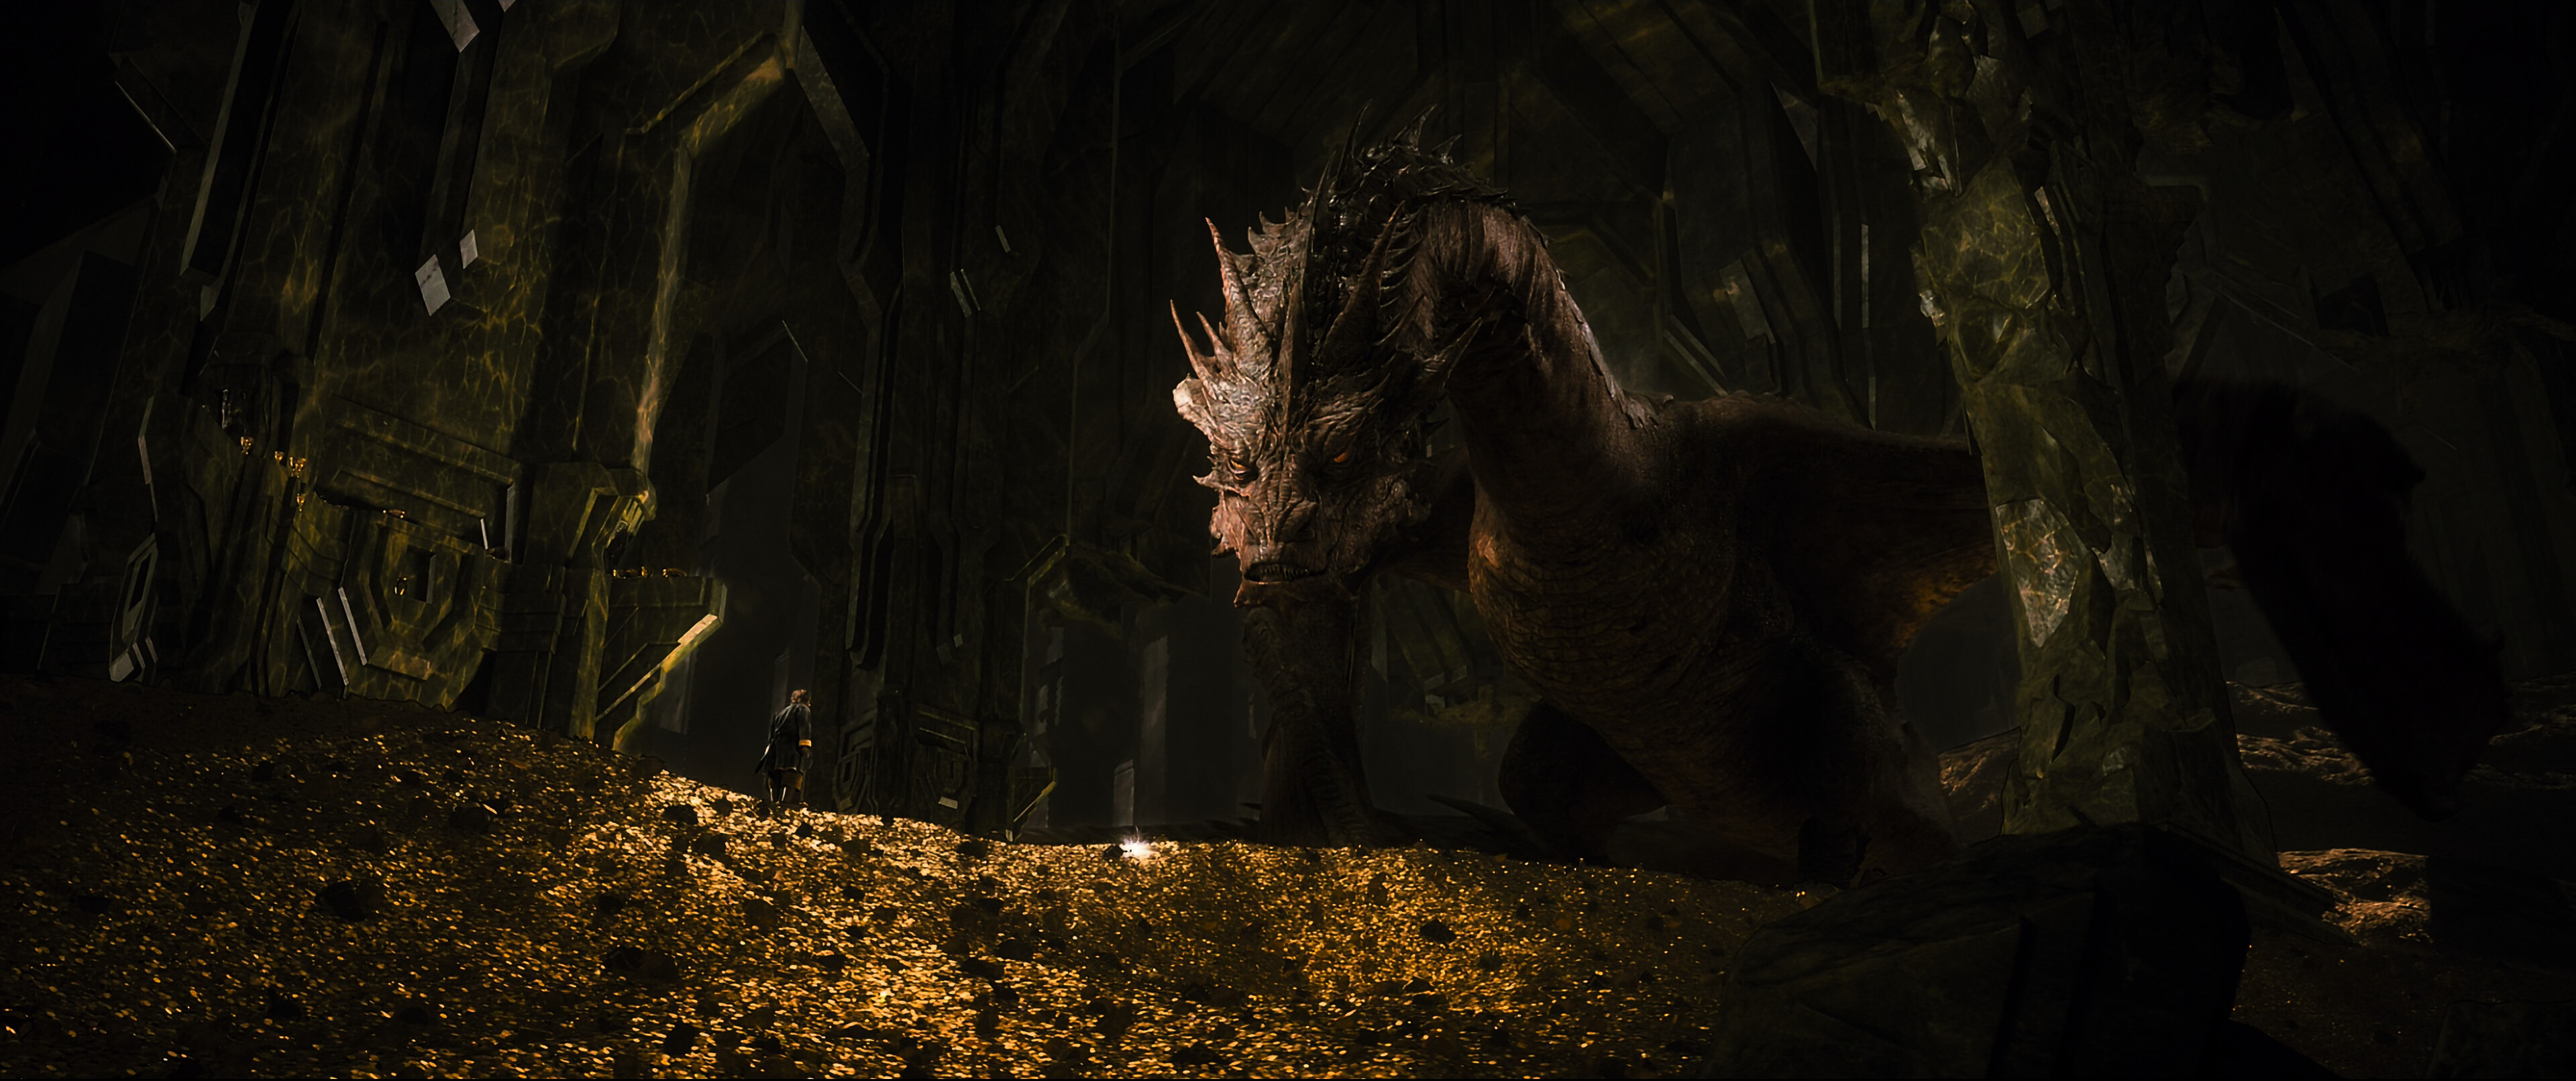 download The Hobbit: The Desolation of Smaug